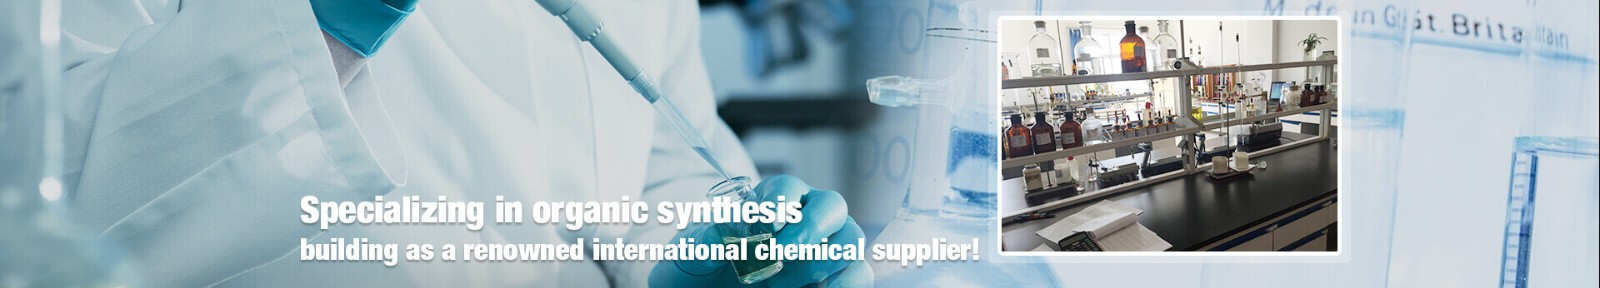 Specializing in organic synthesis building as a renowned international chemical supplier!